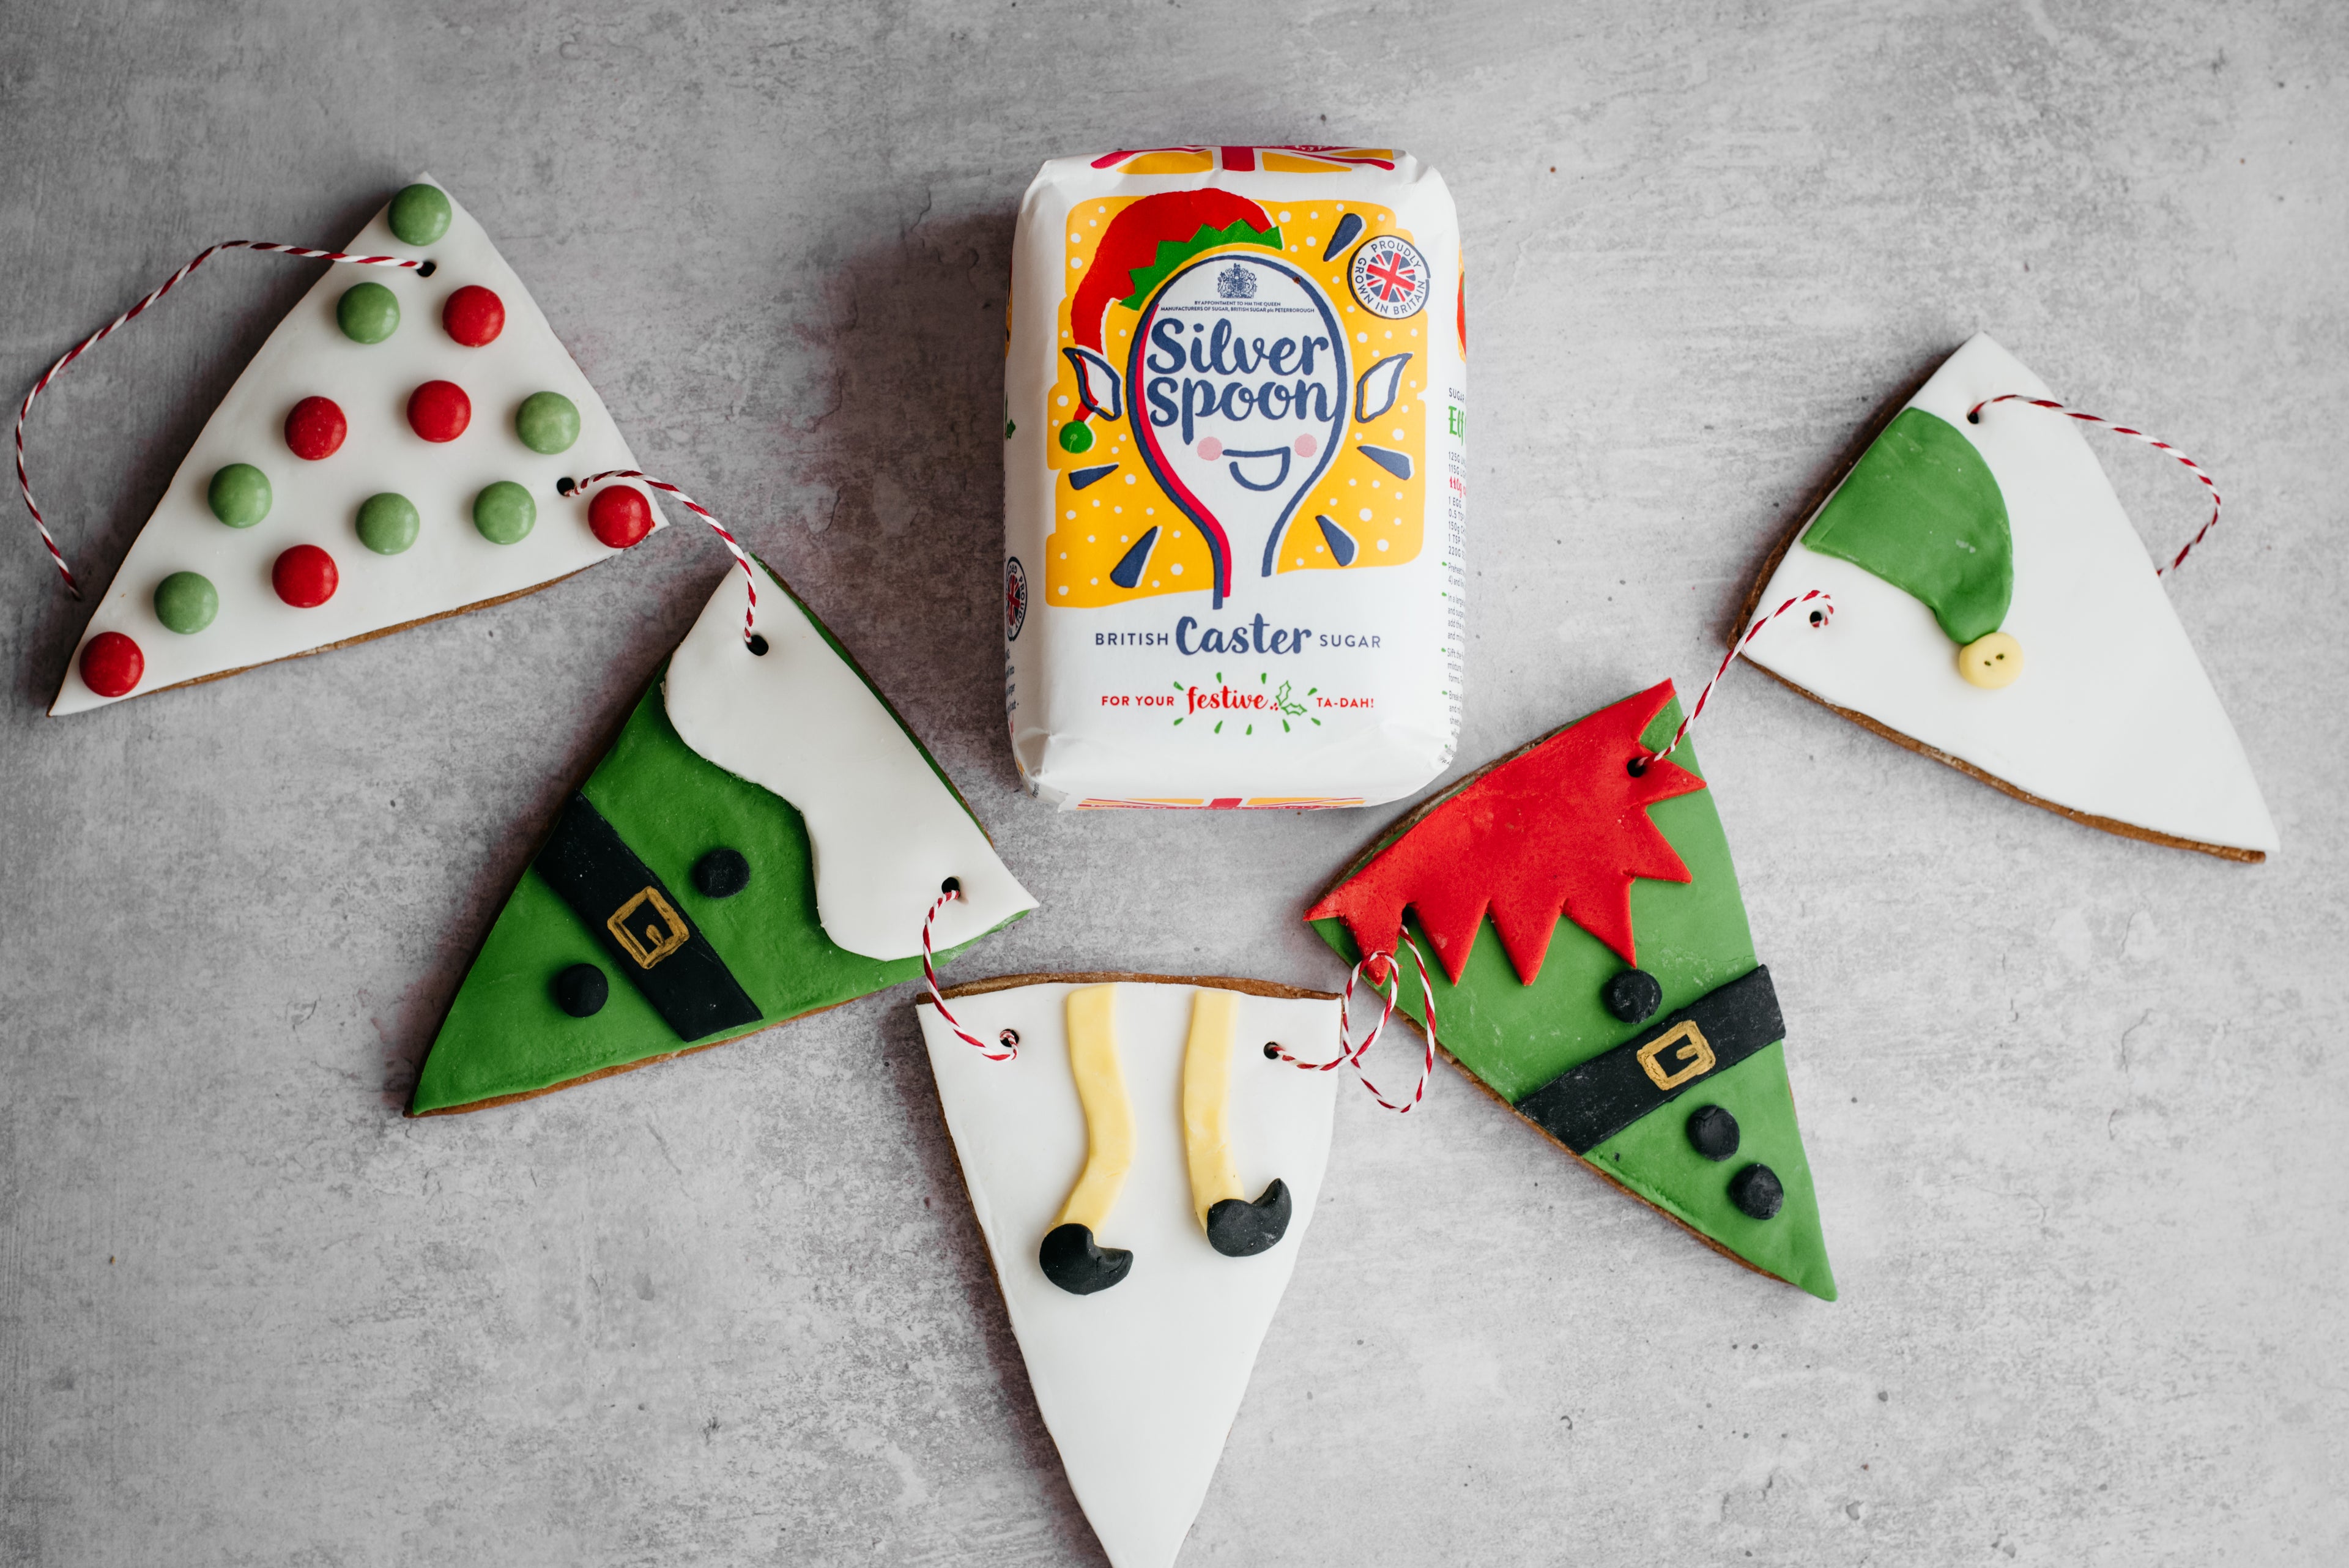 HoHoHo Elf Bunting close up, decorated with elf designs next to a bag of Christmas edition Silver Spoon caster sugar packaging